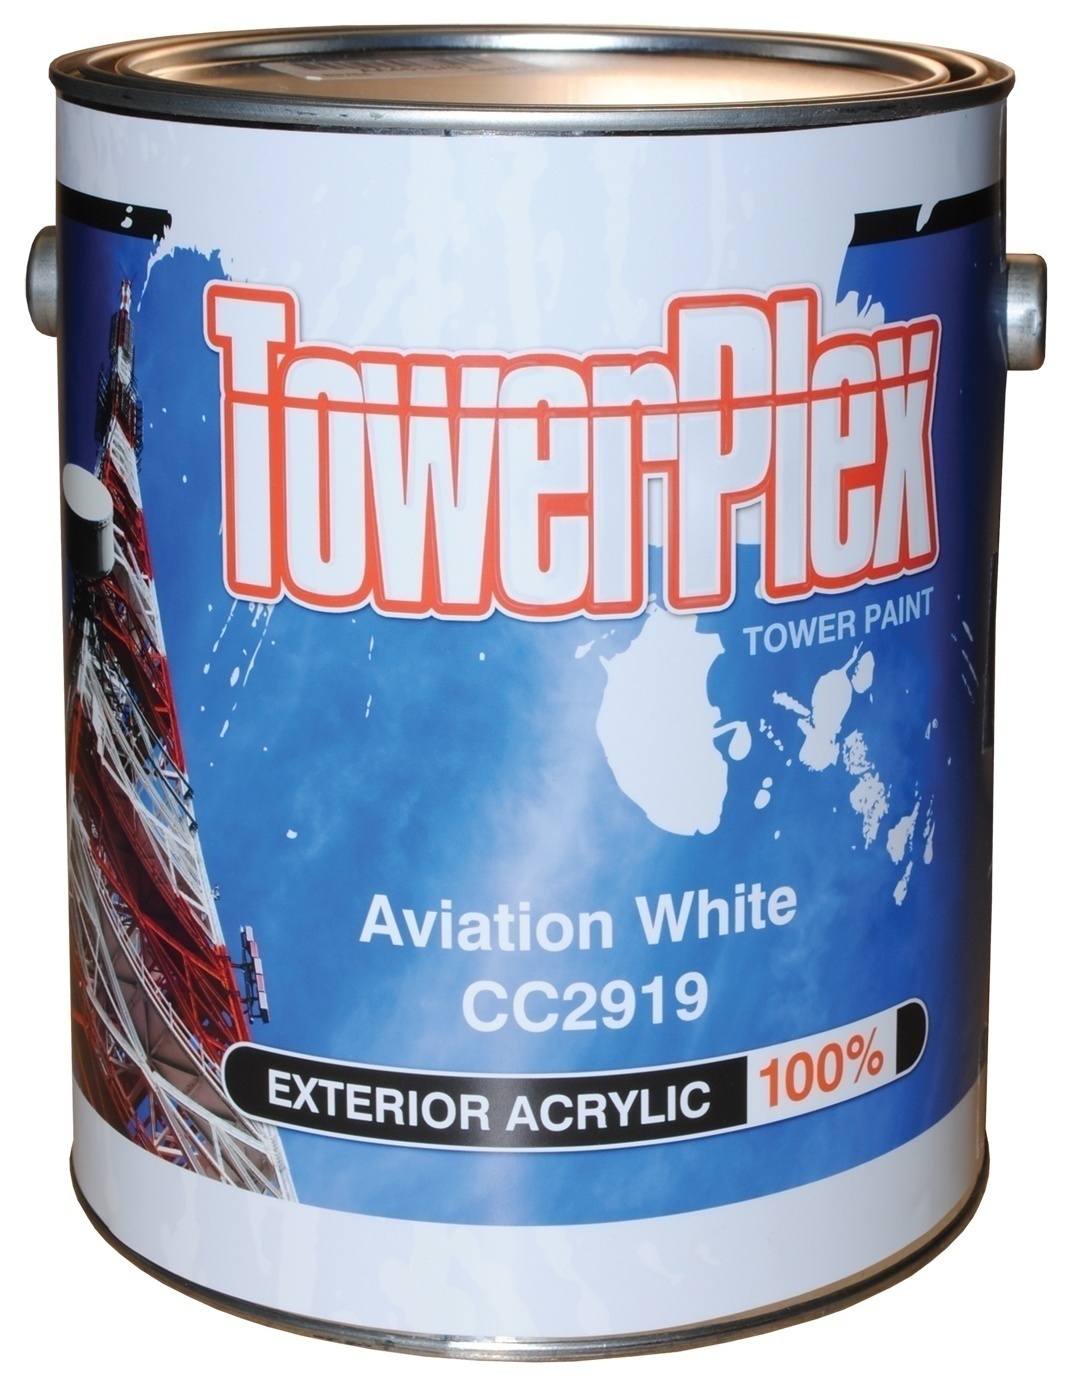 CC2919 TowerPlex Aviation White Tower Paint (1 Gallon Pail) from GME Supply